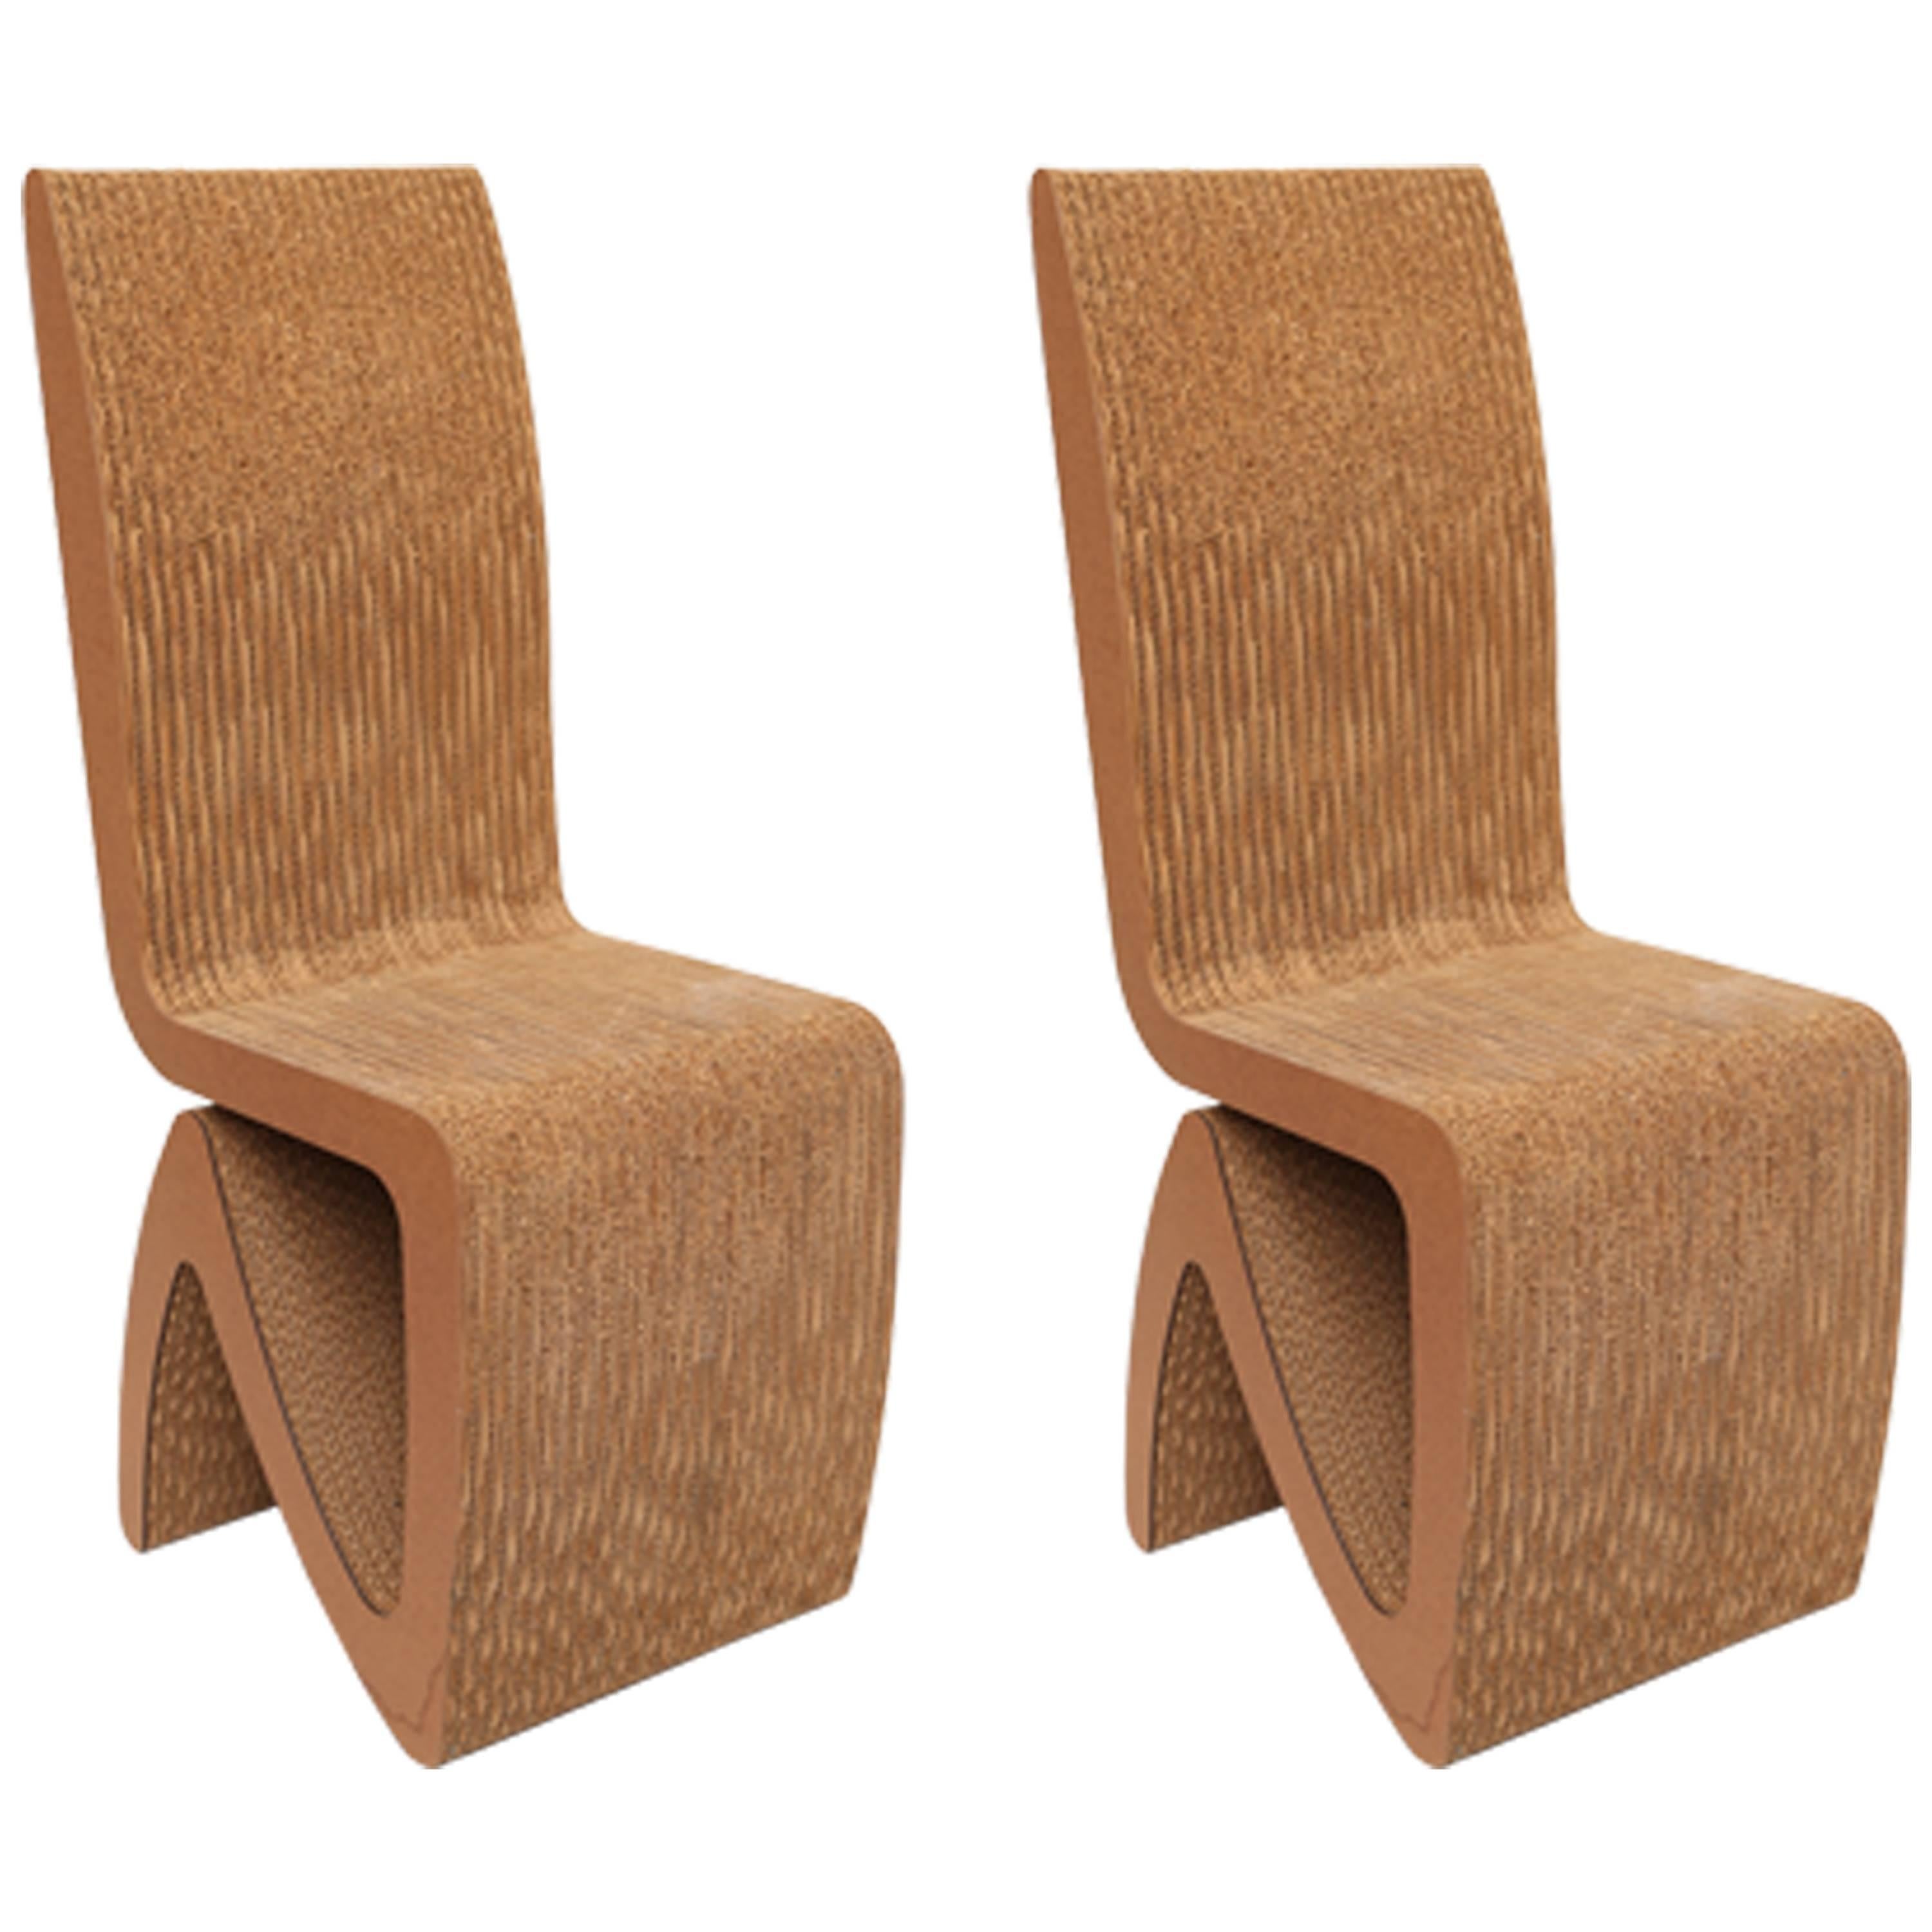 Pair of Frank Gehry Cardboard Chairs, USA, 1970s